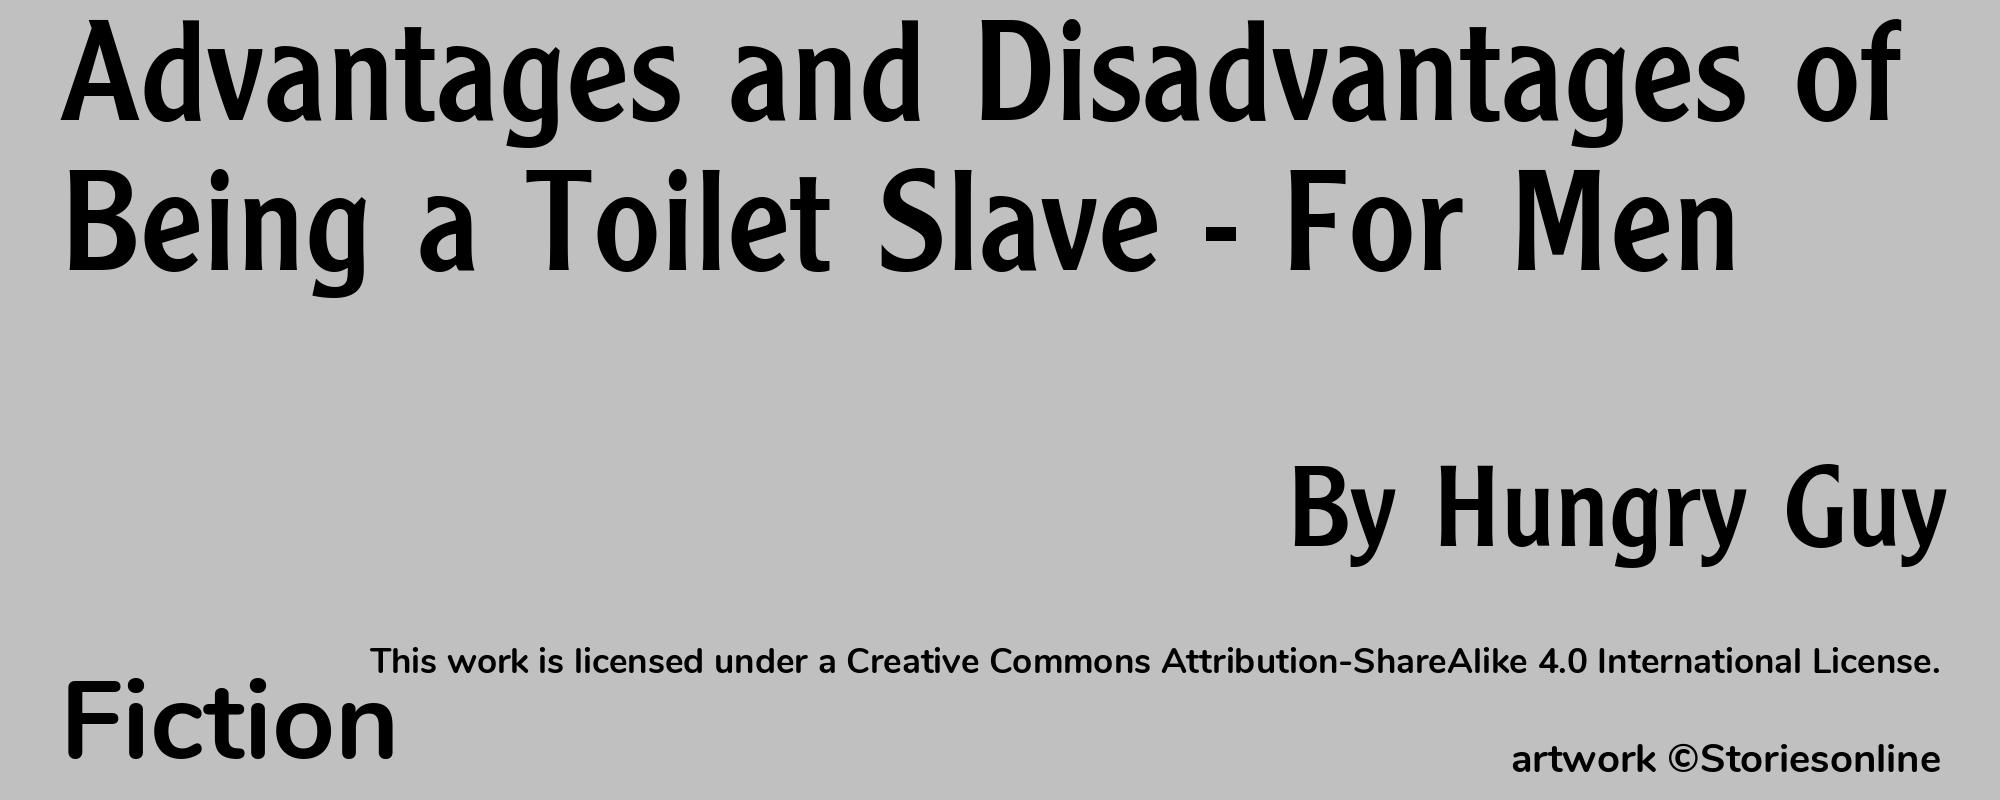 Advantages and Disadvantages of Being a Toilet Slave - For Men - Cover